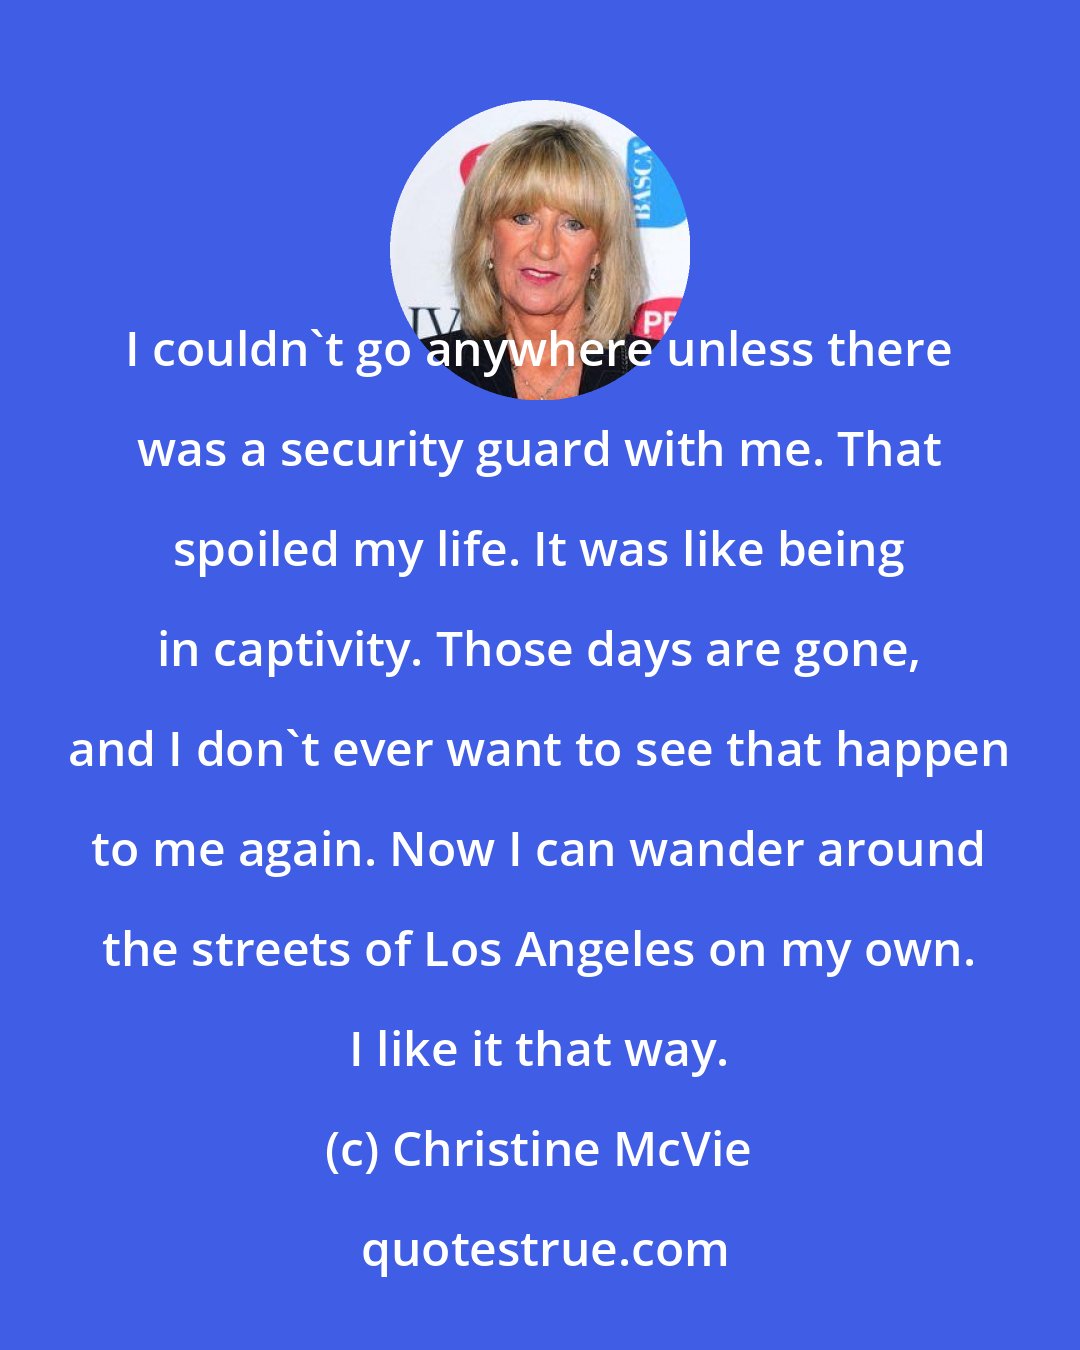 Christine McVie: I couldn't go anywhere unless there was a security guard with me. That spoiled my life. It was like being in captivity. Those days are gone, and I don't ever want to see that happen to me again. Now I can wander around the streets of Los Angeles on my own. I like it that way.